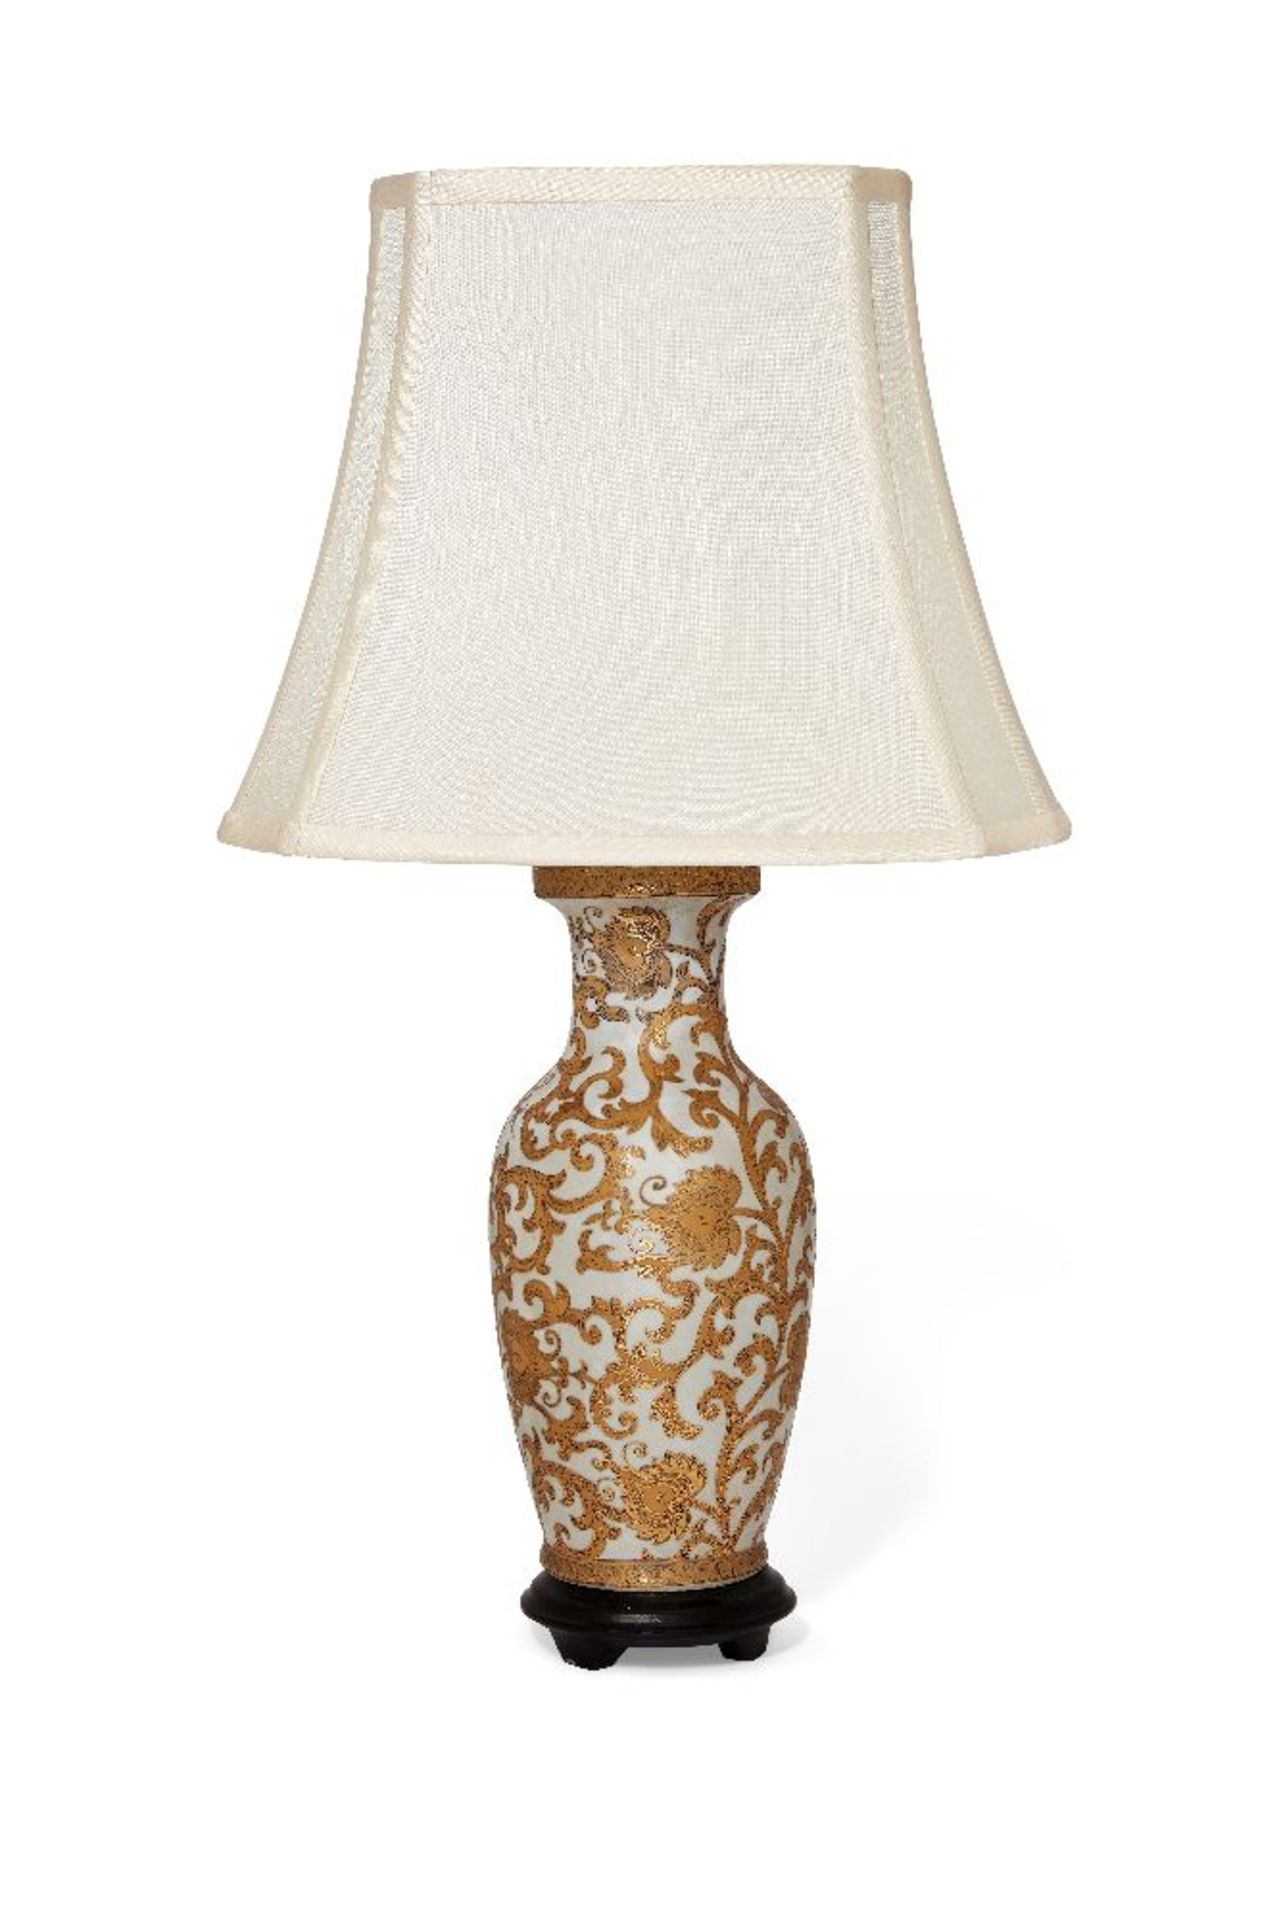 A modern Chinoiserie gilt heightened porcelain vase lamp, decorated overall with scrolling foliate